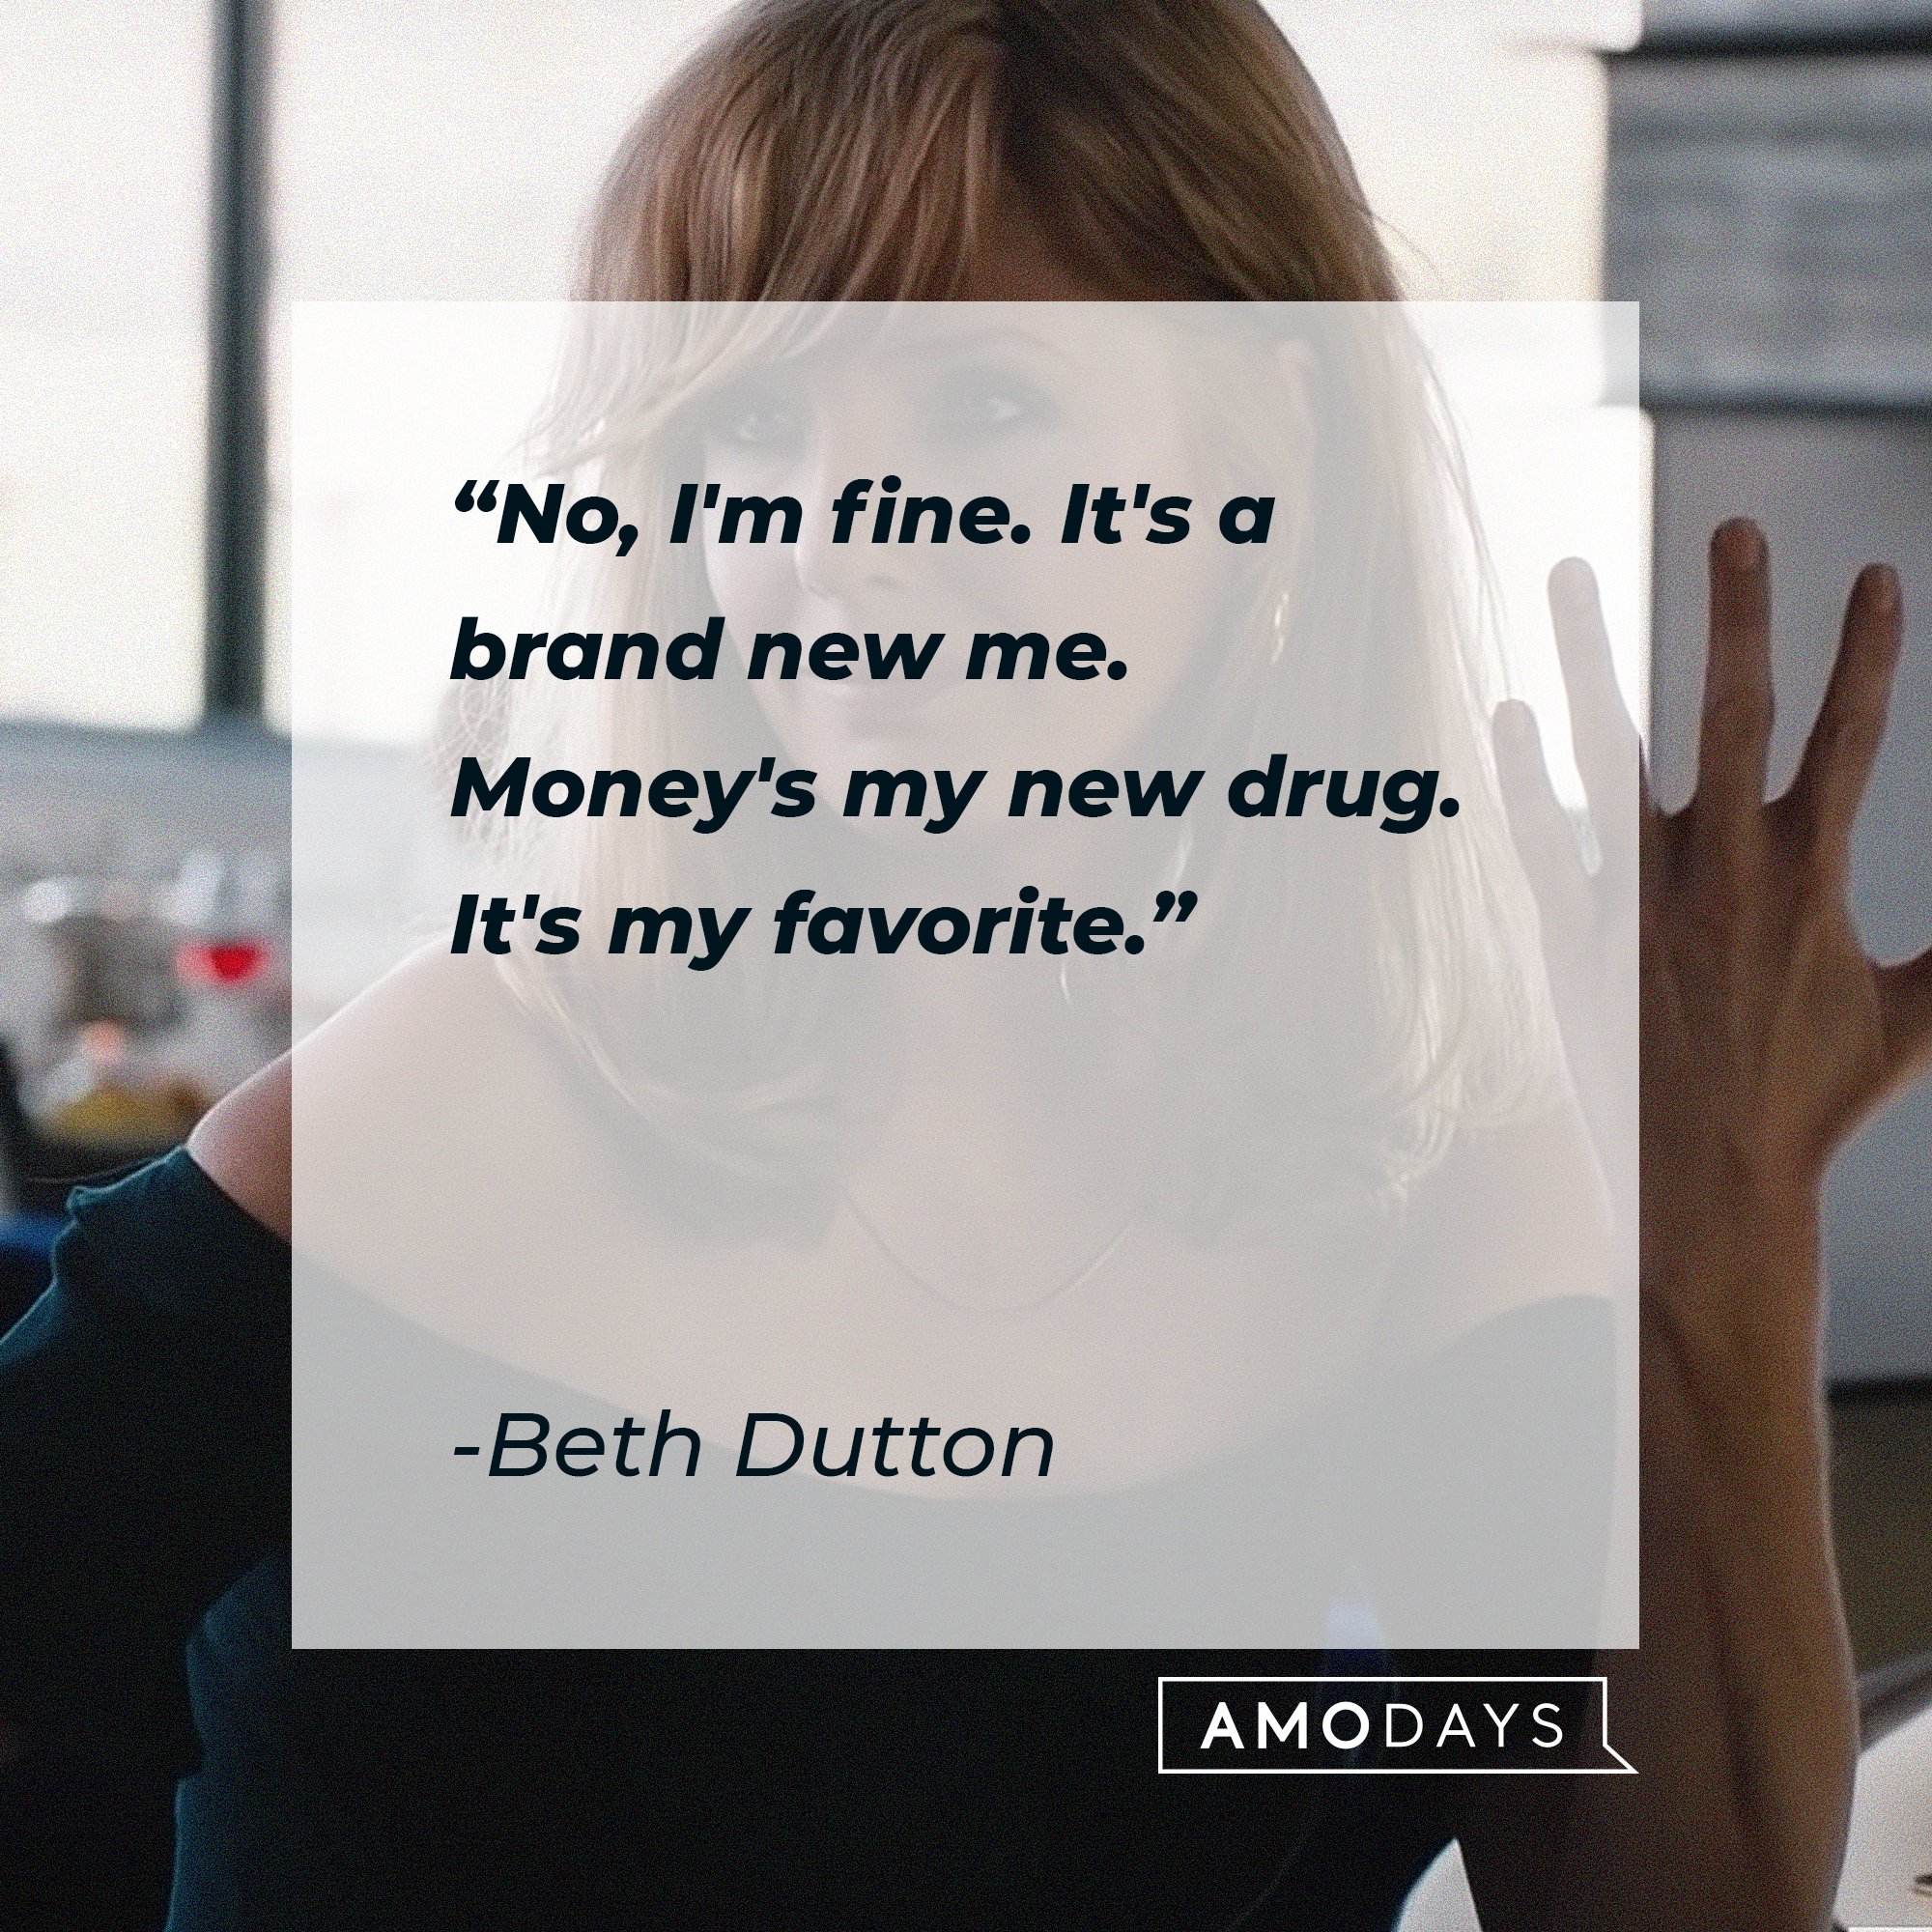  Beth Dutton's quote: "No, I'm fine. It's a brand new me. Money's my new drug. It's my favorite." | Source: AmoDays